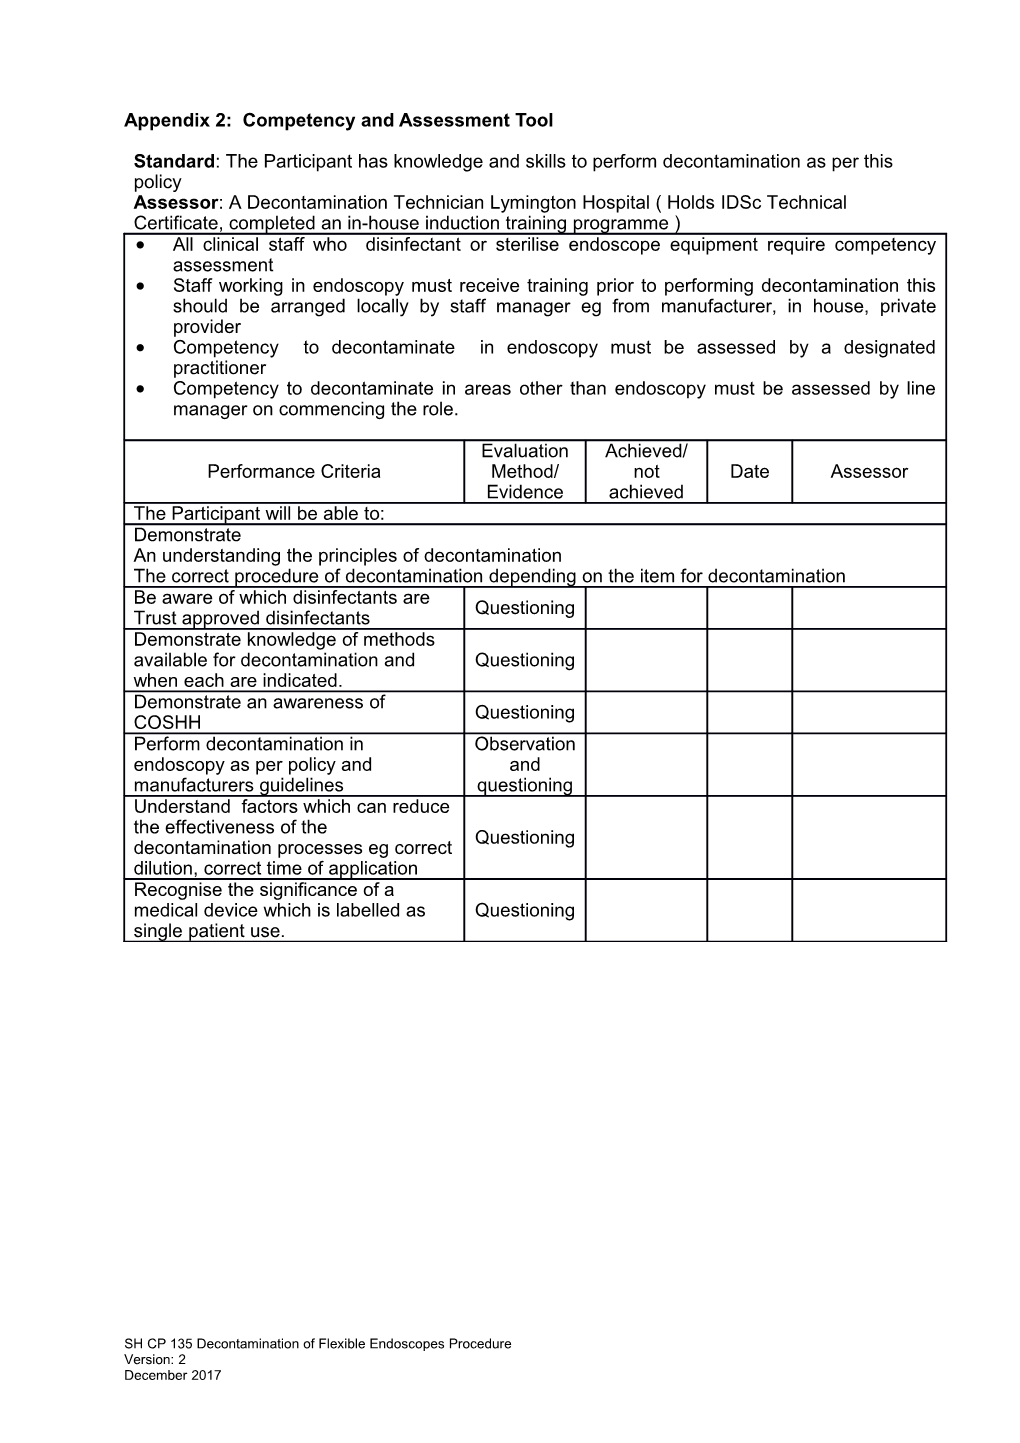 Appendix 2: Competency and Assessment Tool